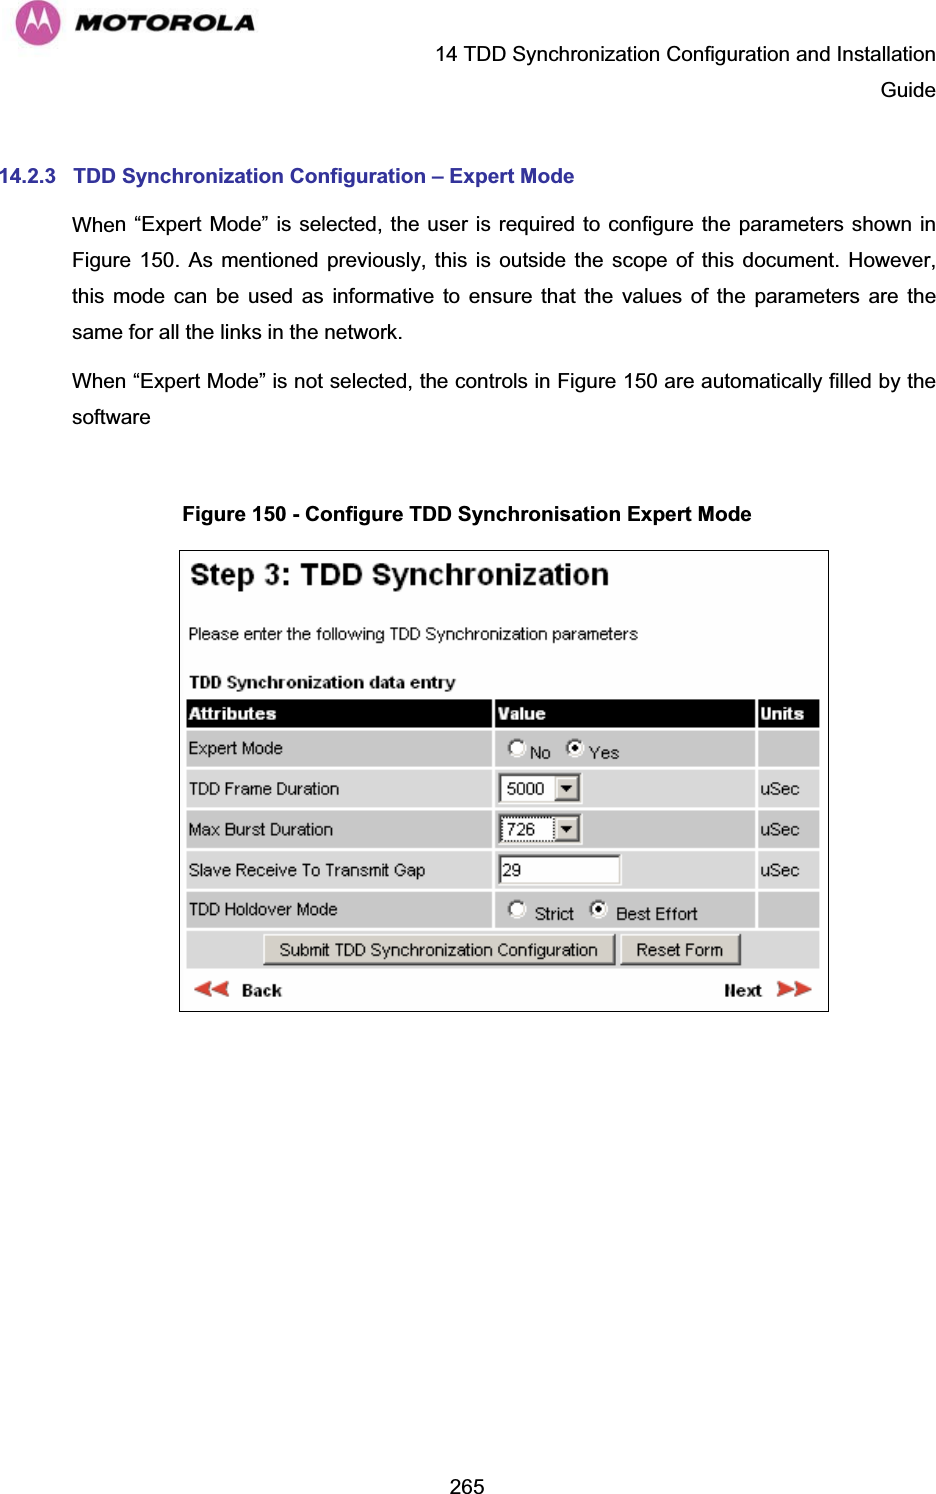   14 TDD Synchronization Configuration and Installation Guide  26514.2.3  TDD Synchronization Configuration – Expert Mode When “Expert Mode” is selected, the user is required to configure the parameters shown in Figure 150. As mentioned previously, this is outside the scope of this document. However, this mode can be used as informative to ensure that the values of the parameters are the same for all the links in the network. When “Expert Mode” is not selected, the controls in Figure 150 are automatically filled by the software  Figure 150 - Configure TDD Synchronisation Expert Mode   